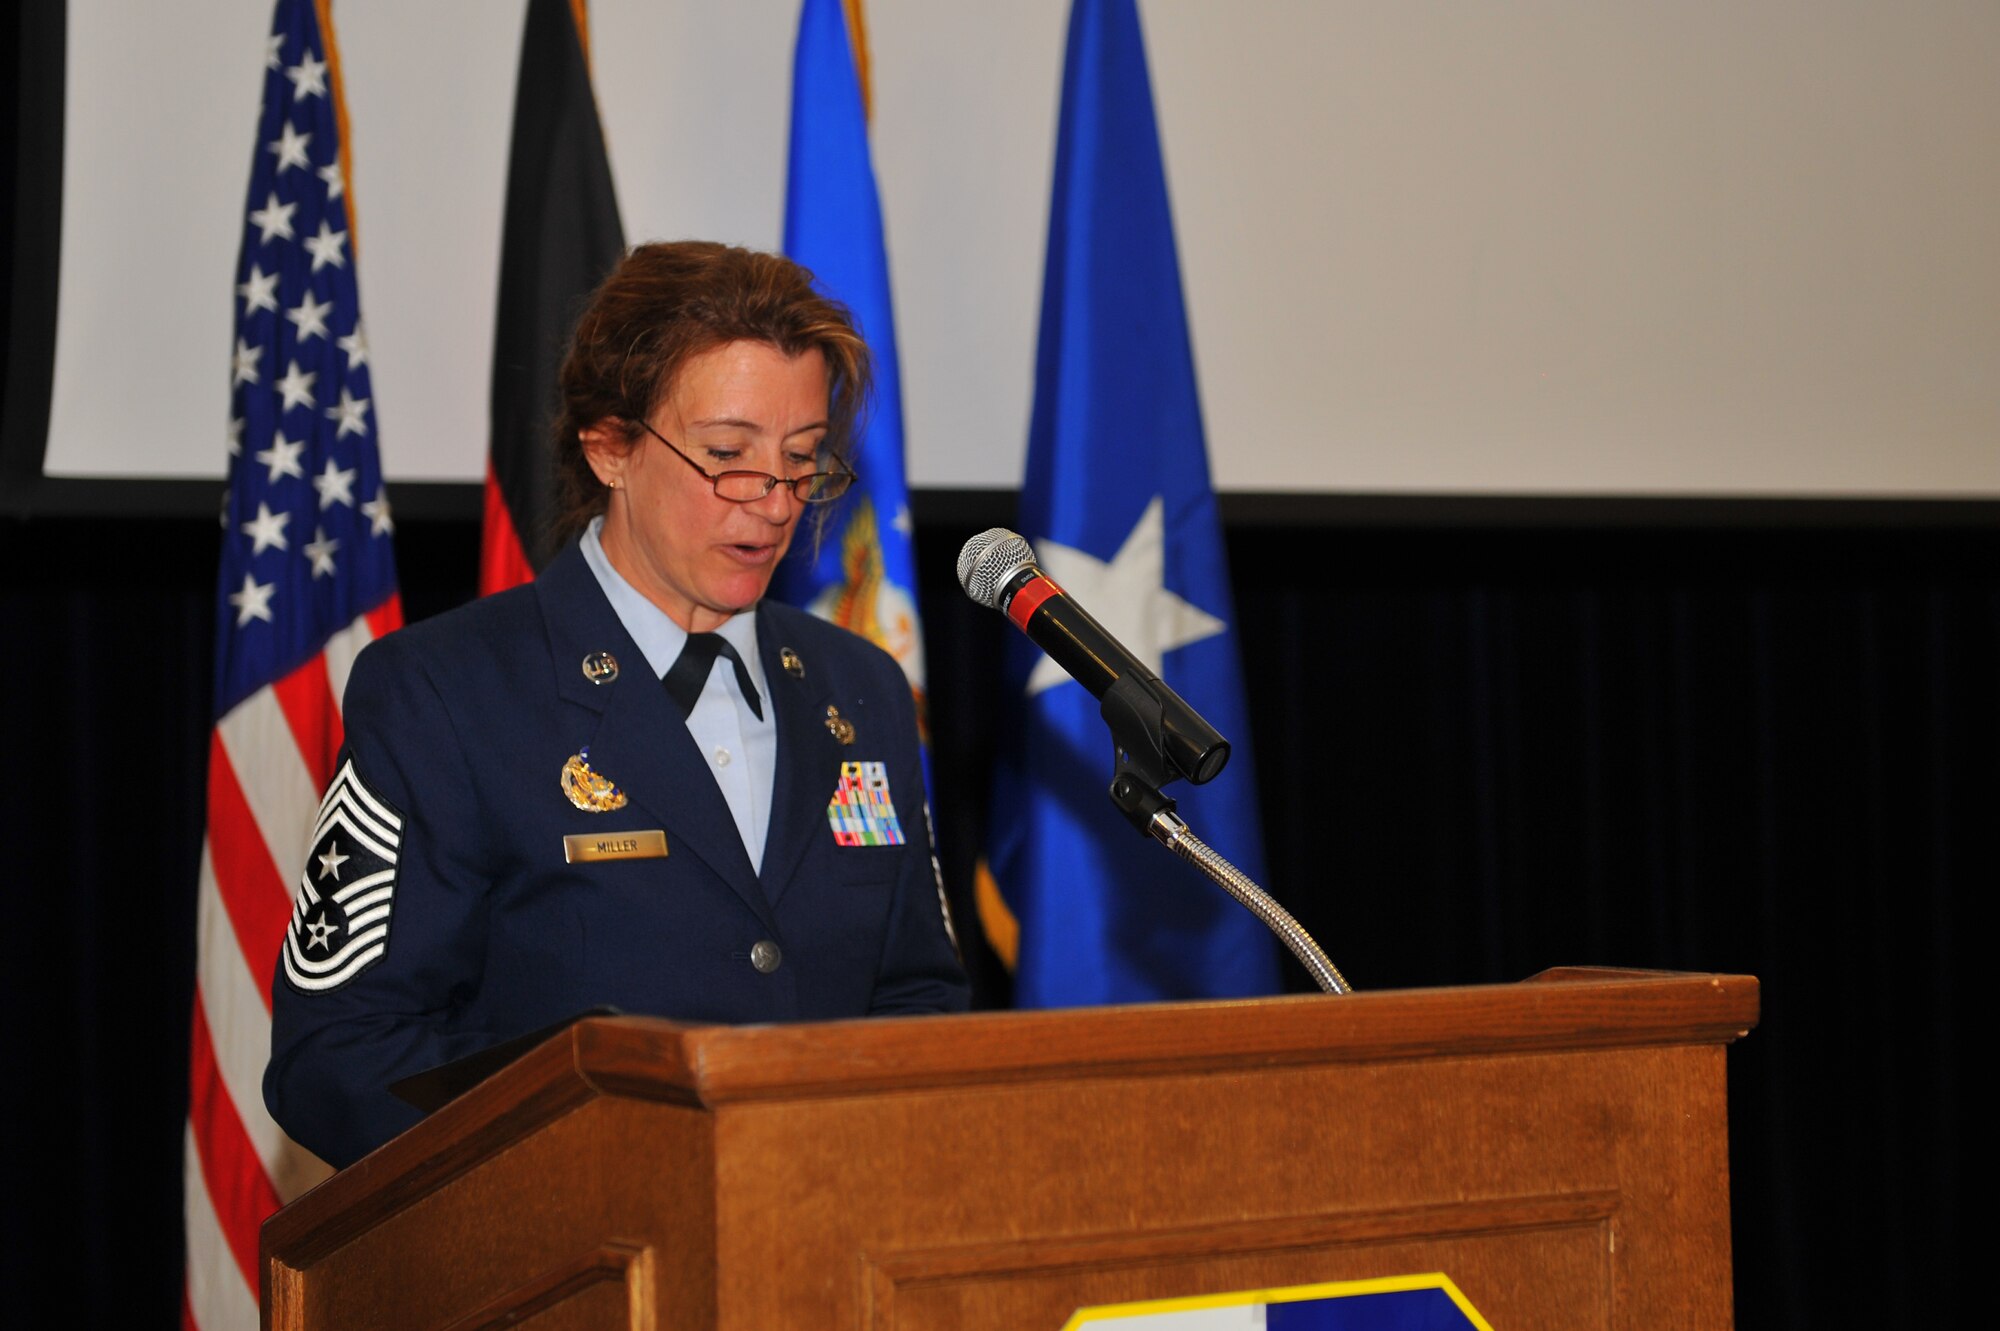 SPANGDAHLEM AIR BASE, Germany – Chief Master Sgt. Sandra Miller, 52nd Fighter Wing command chief, gives closing remarks during her retirement ceremony inside the Club Eifel ballroom here June 8. Miller retired after 29 years of service and more than 150 people attended the ceremony to celebrate her transition into civilian life. (U.S. Air Force photo by Airman 1st Class Dillon Davis/Released)